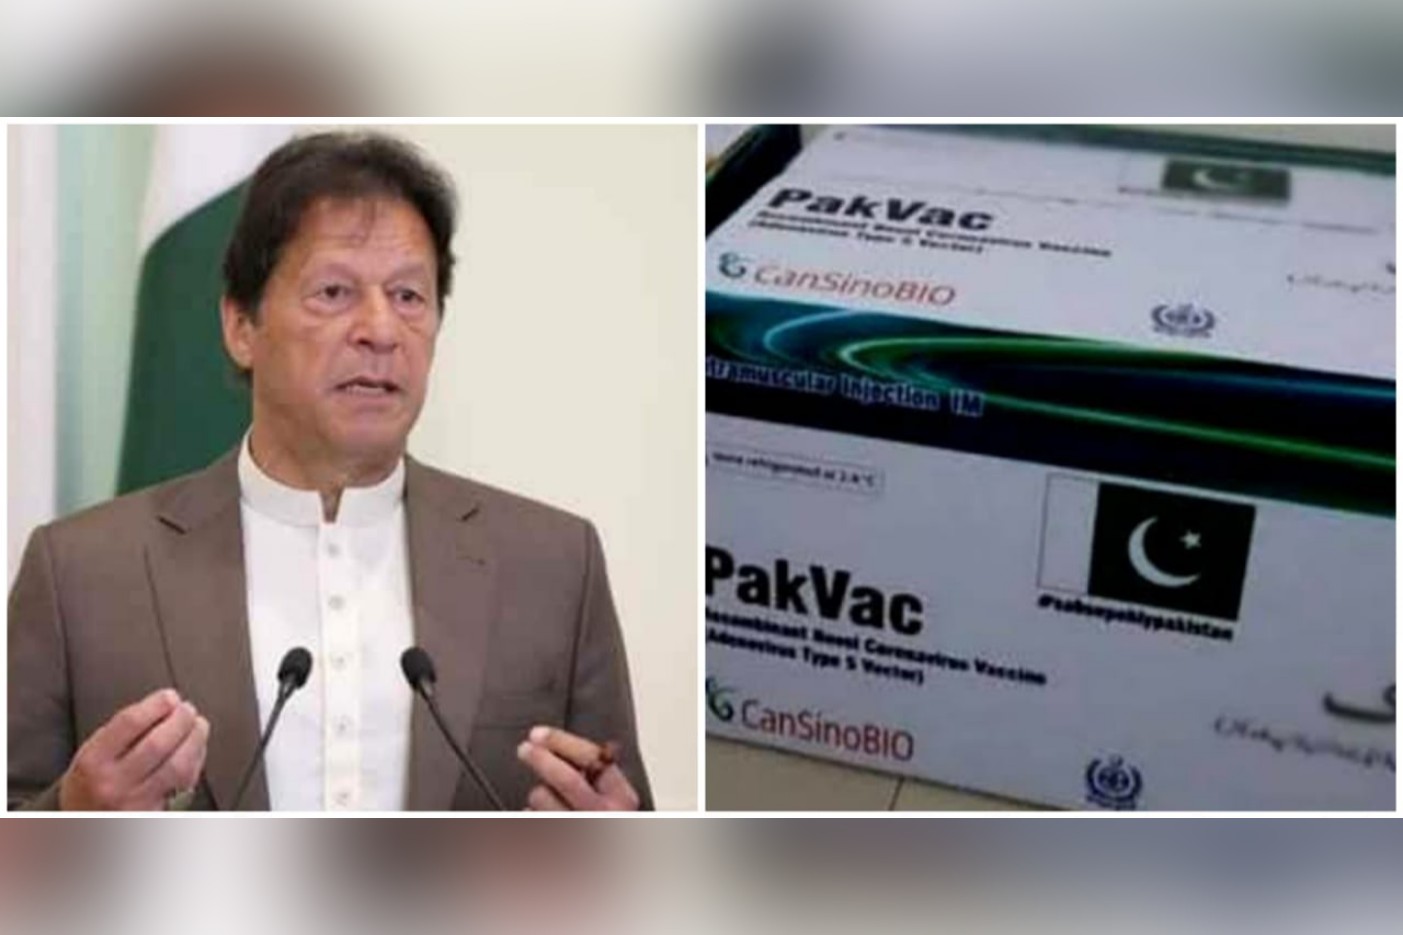 Man Dies After Taking PakVac, Imran Khan Claims Vaccine Working Perfectly Fine Since Corona Virus Also Died Inside Man's Body